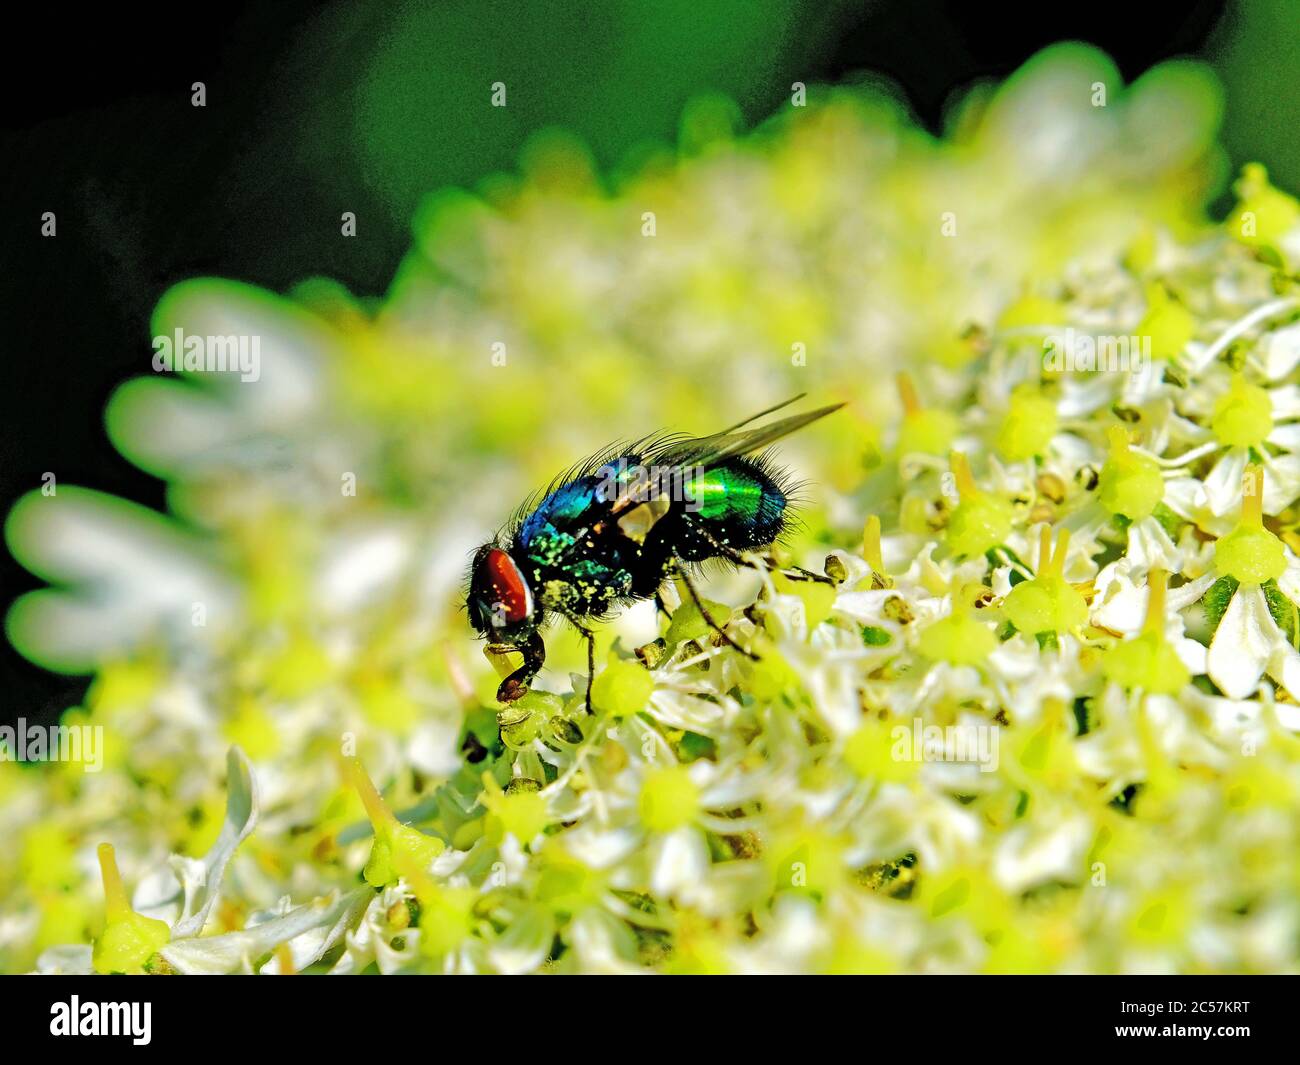 Blue green hairy fly with red eyes feeding on yellow white flowers Stock Photo